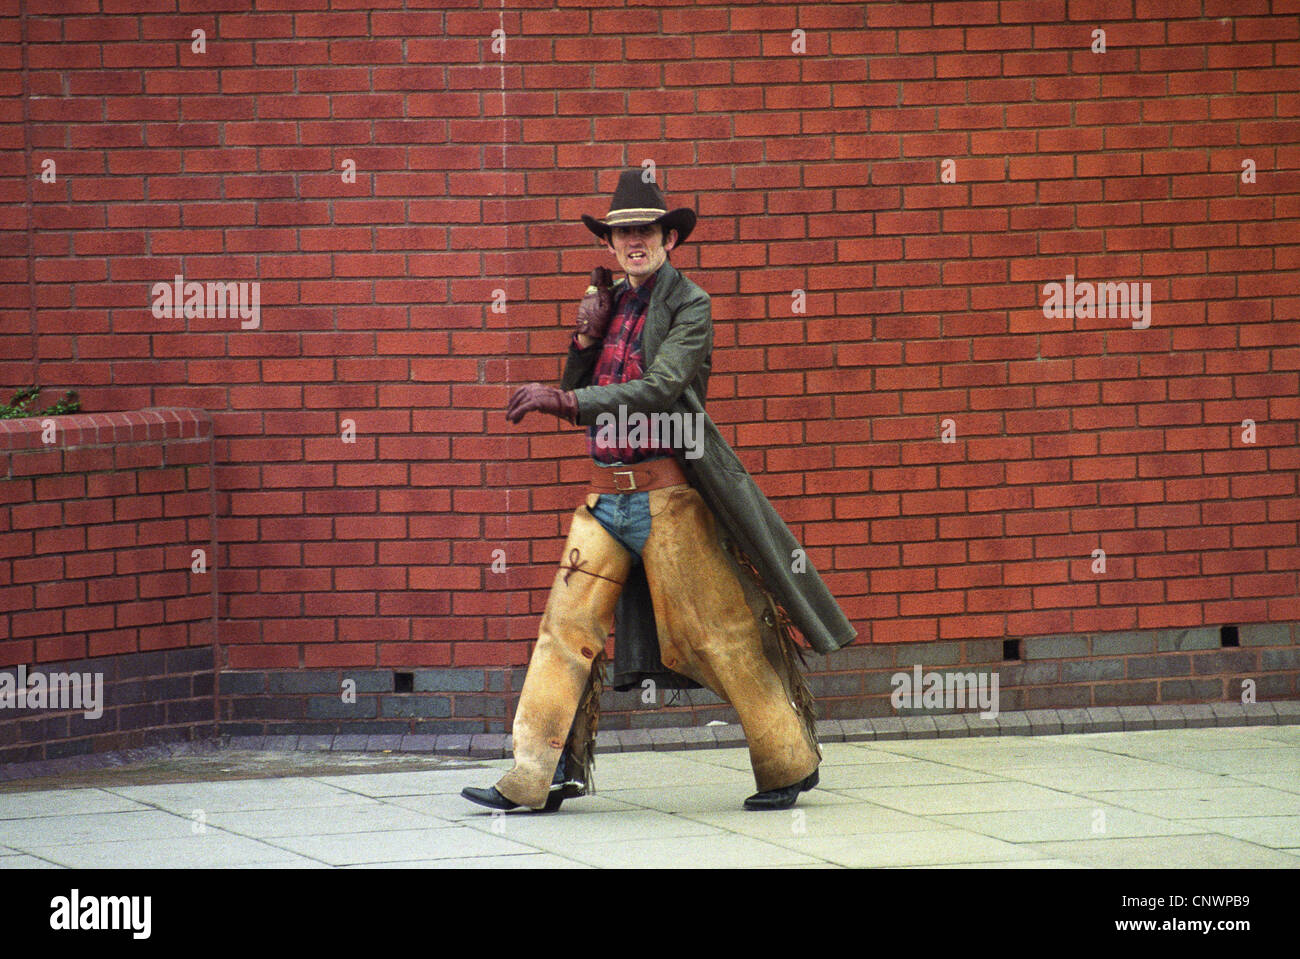 The Urban cowboy David Cox in Wolverhampton, England  2/2/93. He walked around the town as a cowboy for 20 years until he became Stock Photo